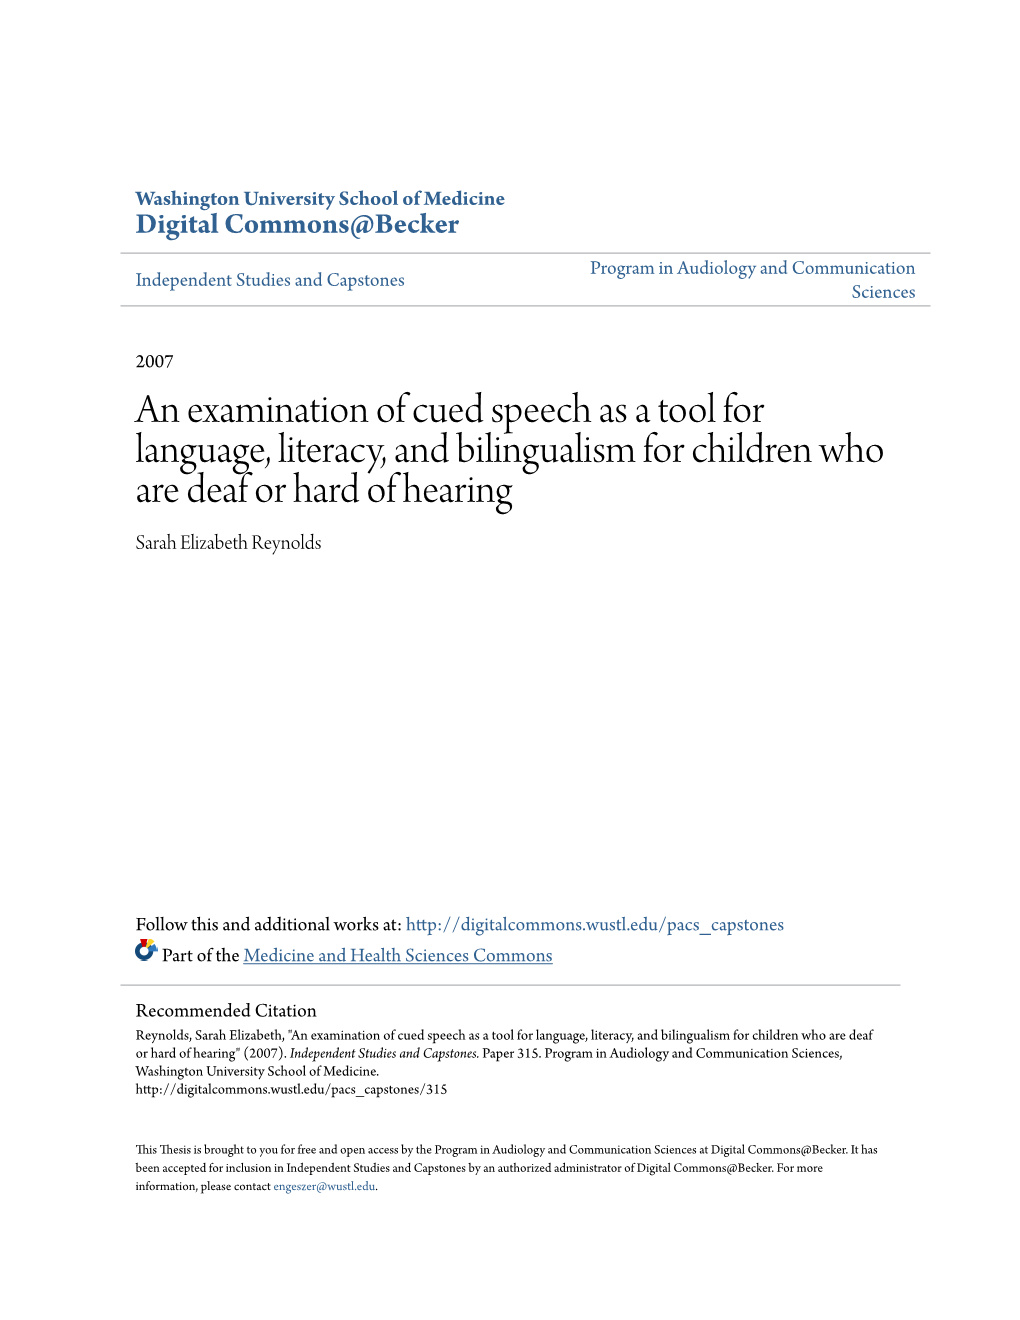 An Examination of Cued Speech As a Tool for Language, Literacy, and Bilingualism for Children Who Are Deaf Or Hard of Hearing Sarah Elizabeth Reynolds